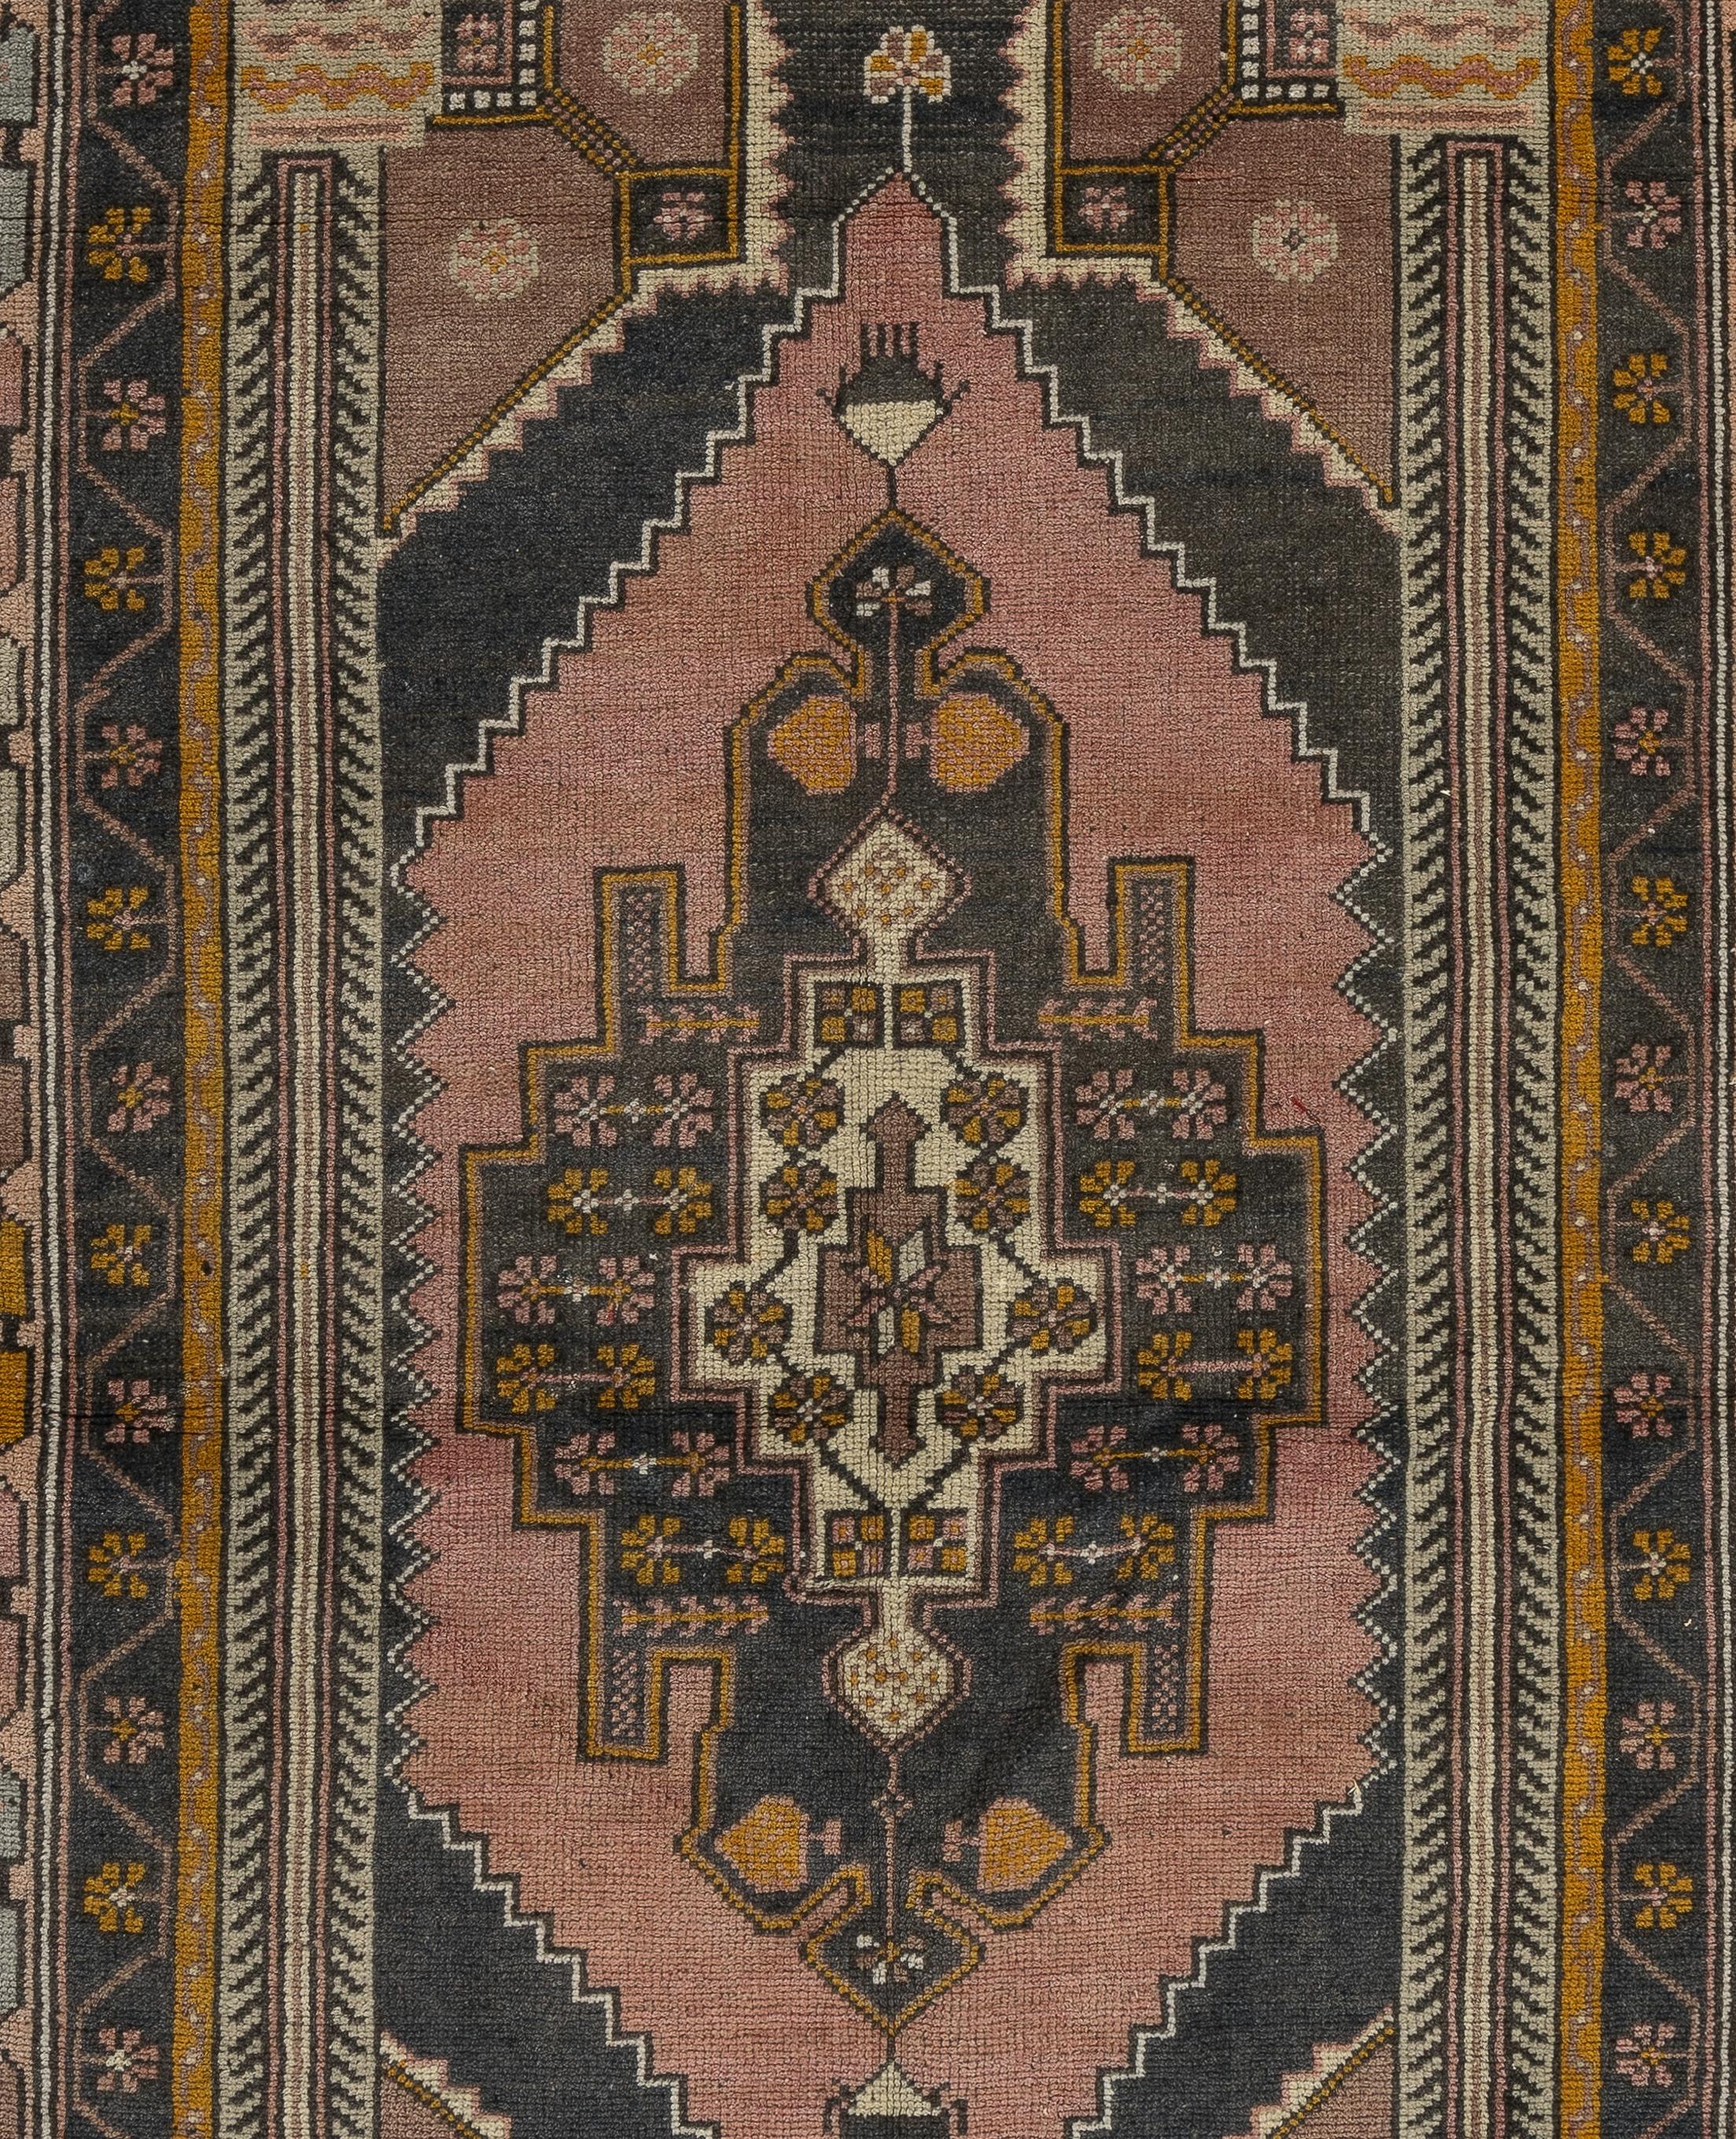 Hand-Woven 4.4x7.3 Ft Handmade Mid Century Turkish One-of-a-kind Rug with Tribal Style For Sale